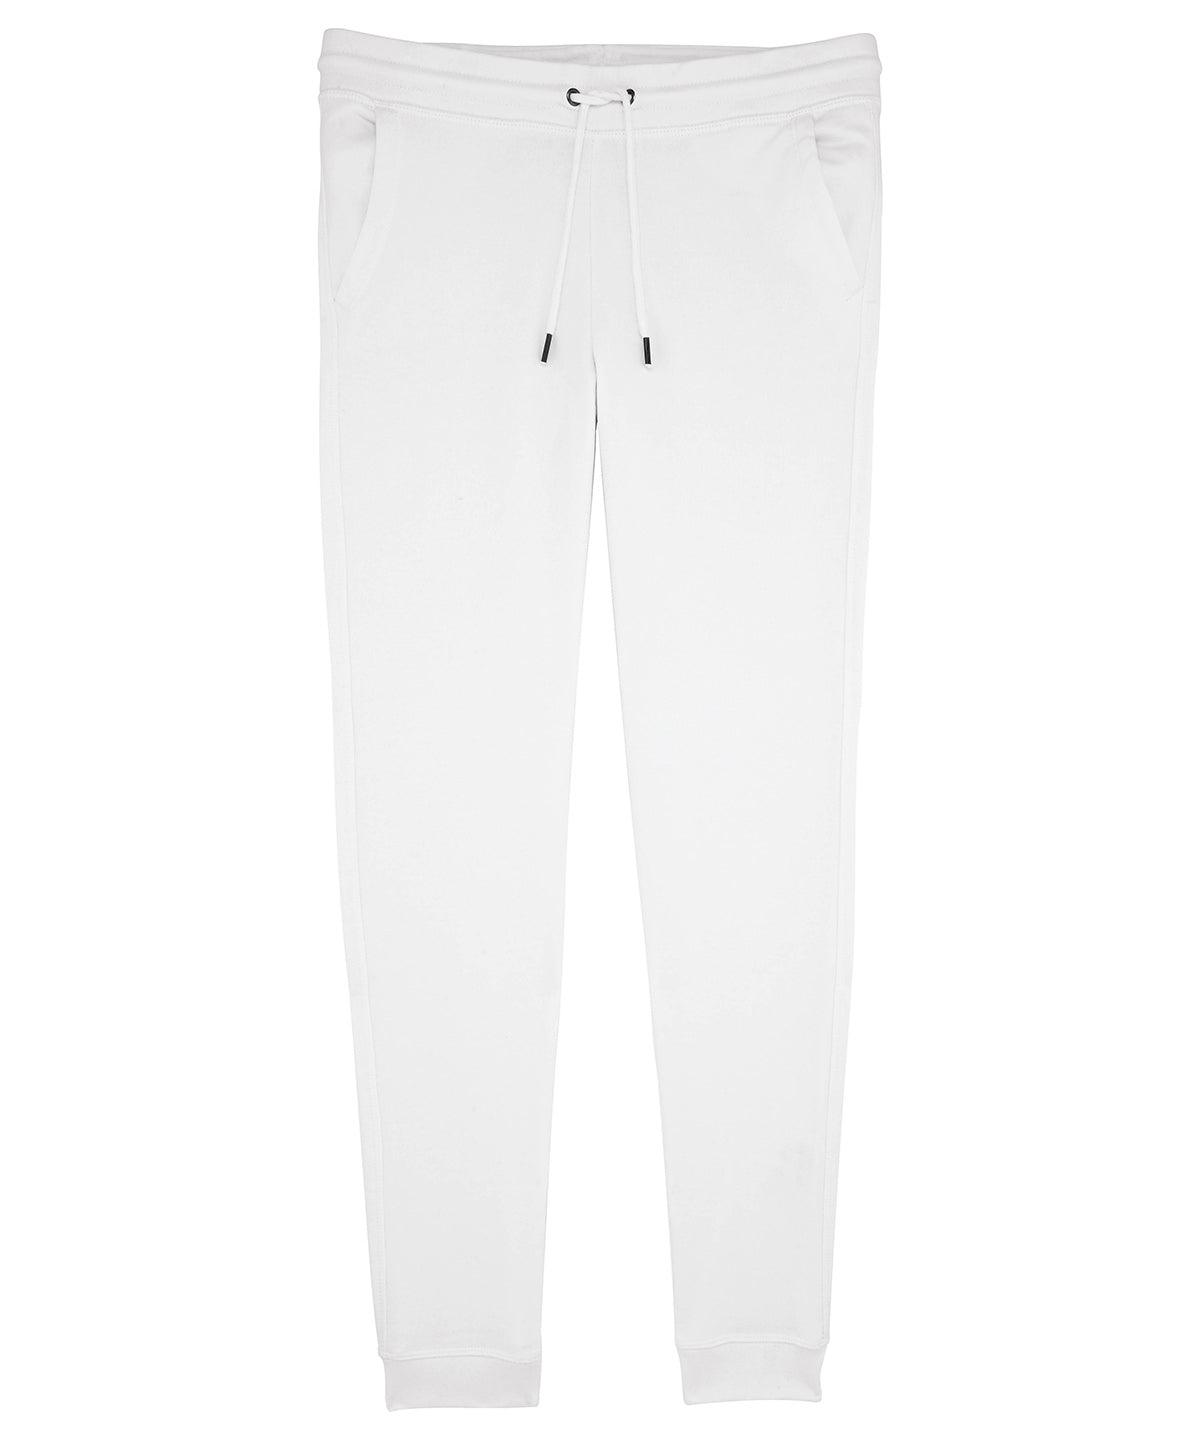 White - Women's Stella Traces jogger pants (STBW129) Sweatpants Stanley/Stella Exclusives, Joggers, New Colours For 2022, Organic & Conscious, Stanley/ Stella, Women's Fashion Schoolwear Centres